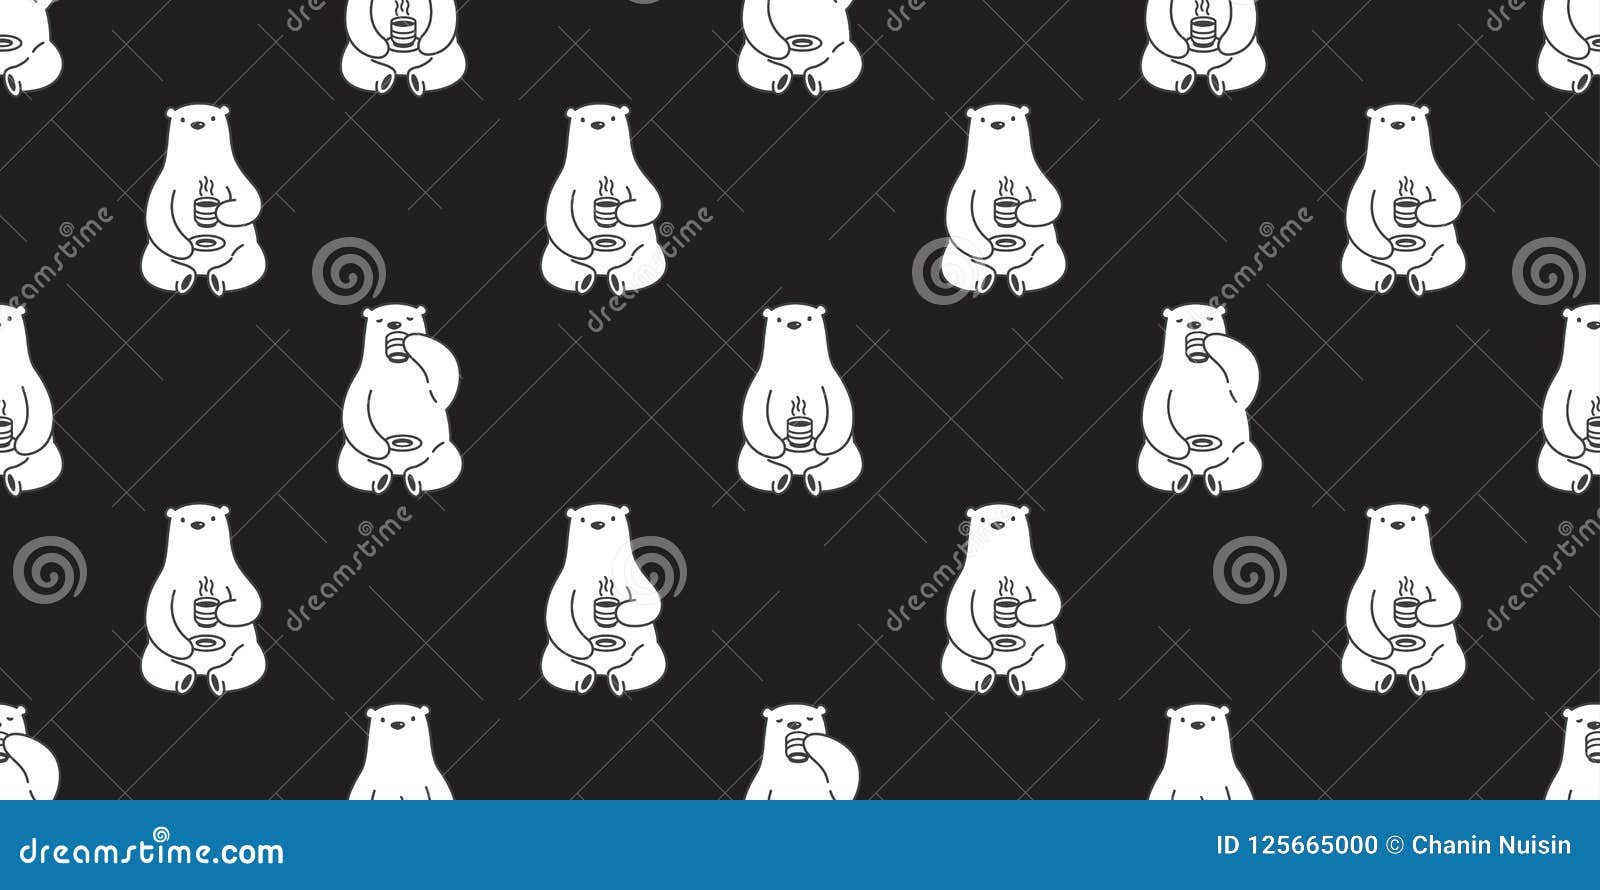 Vector Coffee Wallpaper Stock Illustrations 19 542 Vector Coffee Wallpaper Stock Illustrations Vectors Clipart Dreamstime